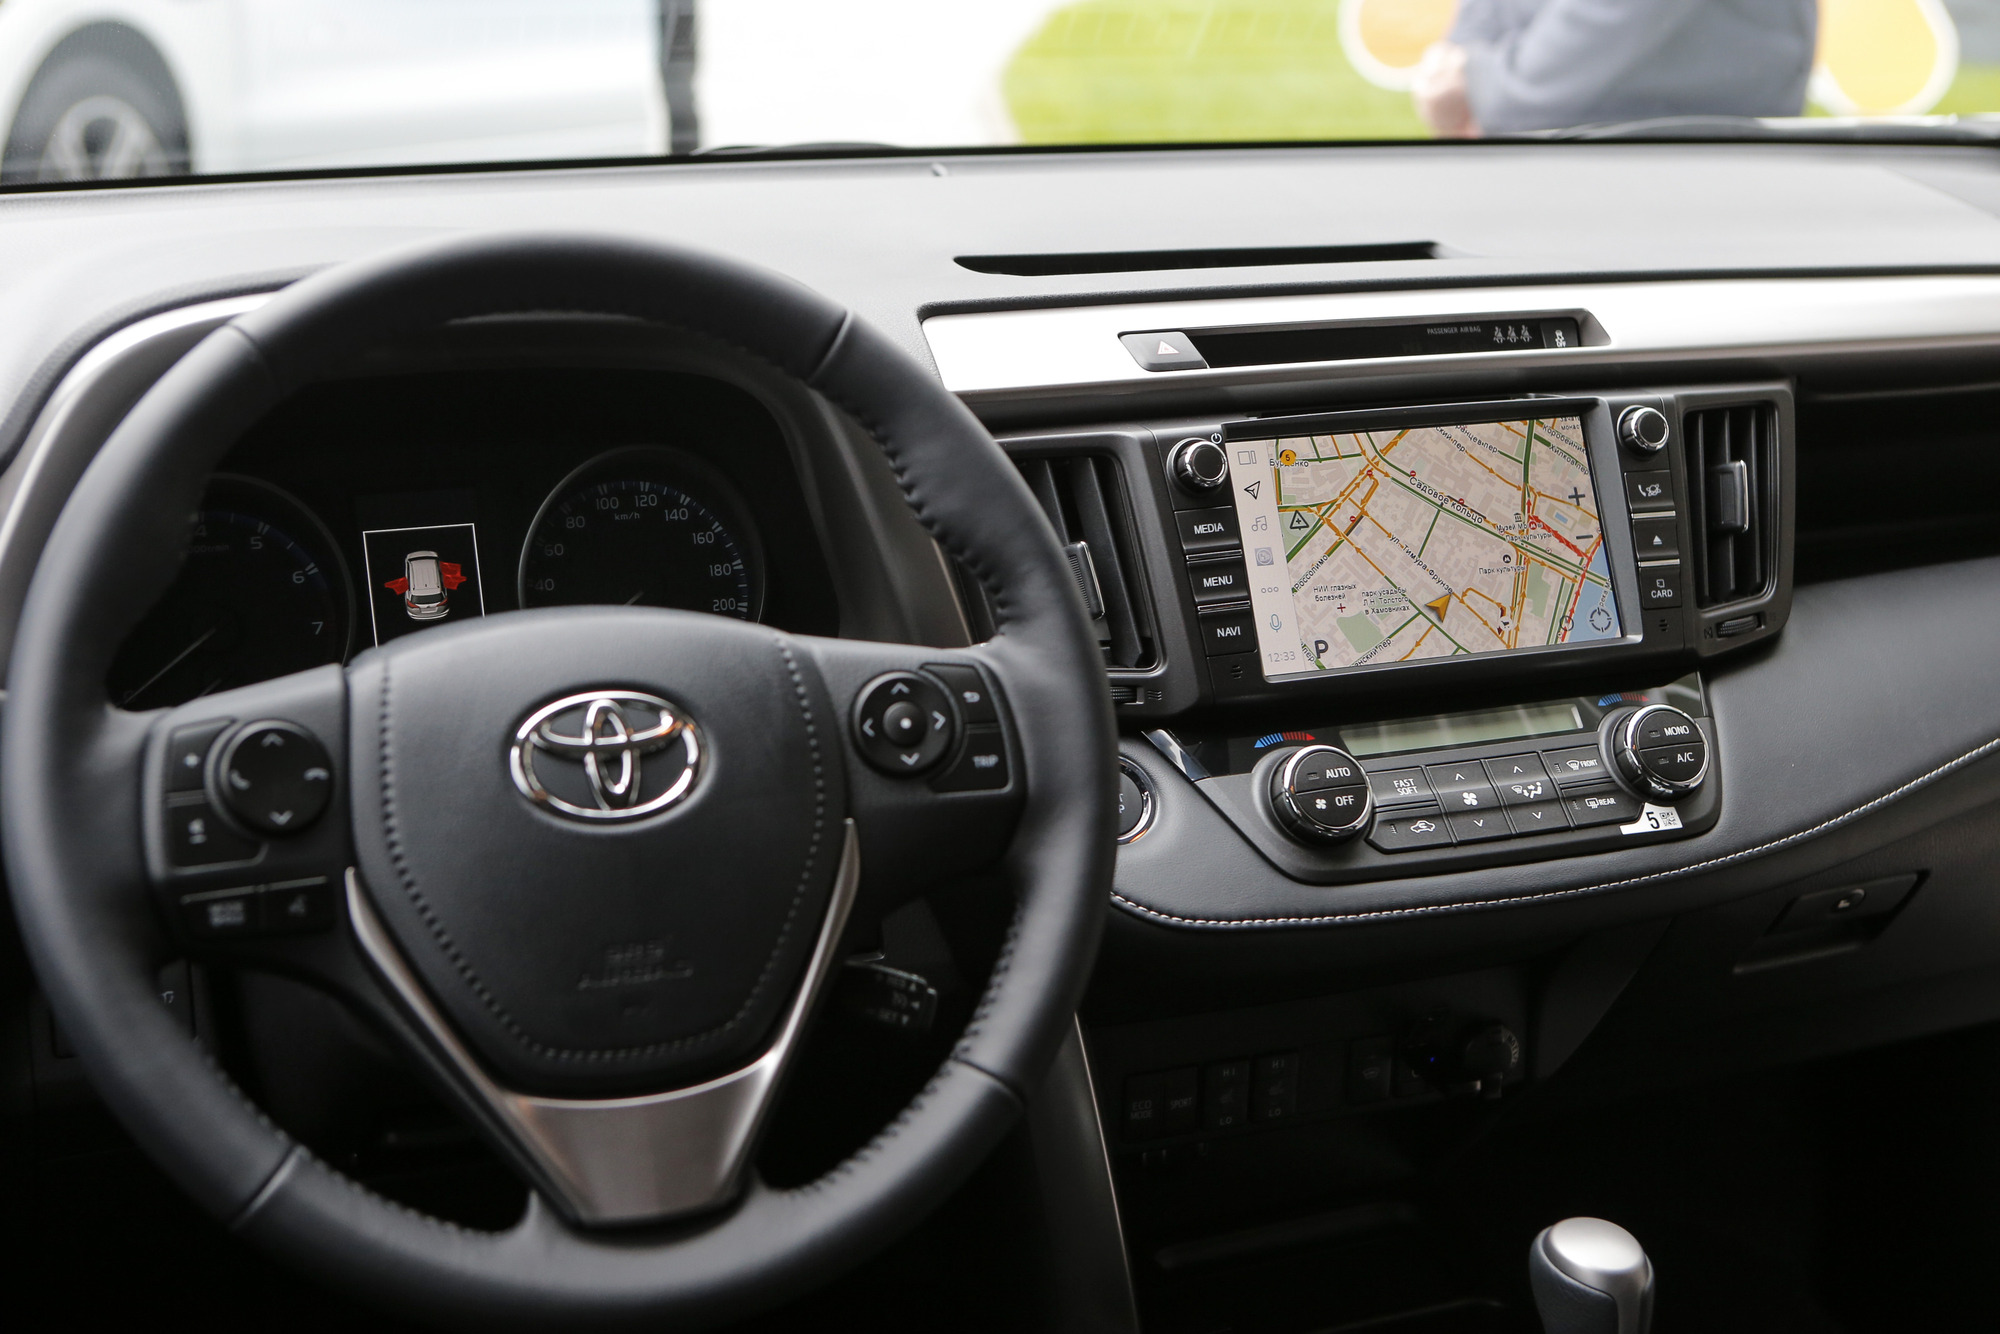 Infotainment system, one of the car features, displaying road navigation map